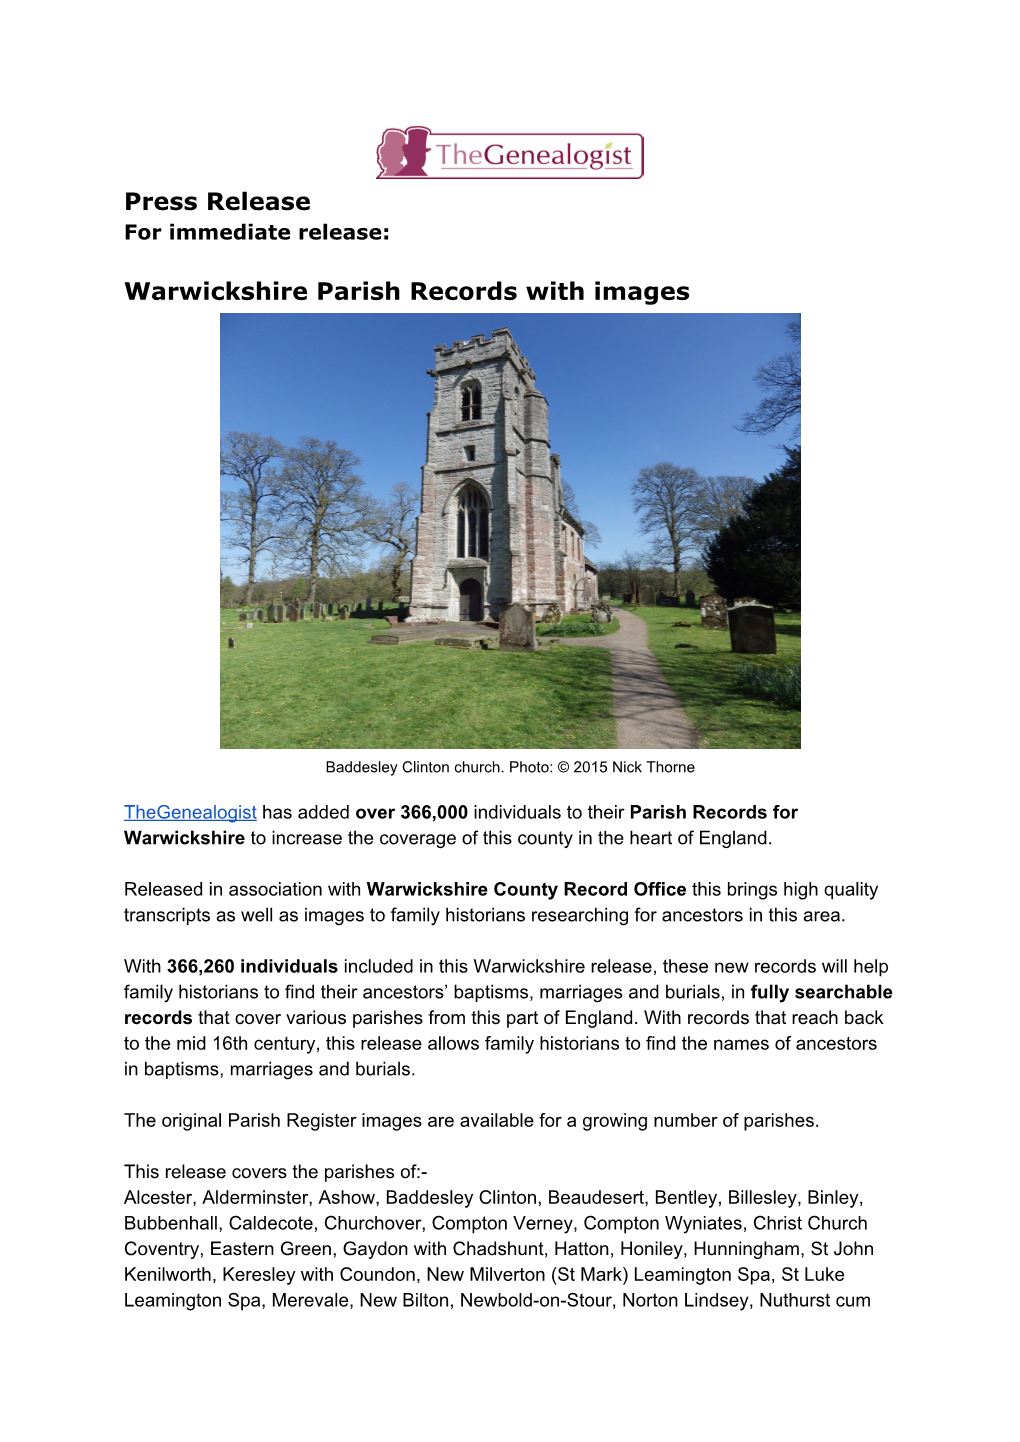 Press Release Warwickshire Parish Records with Images